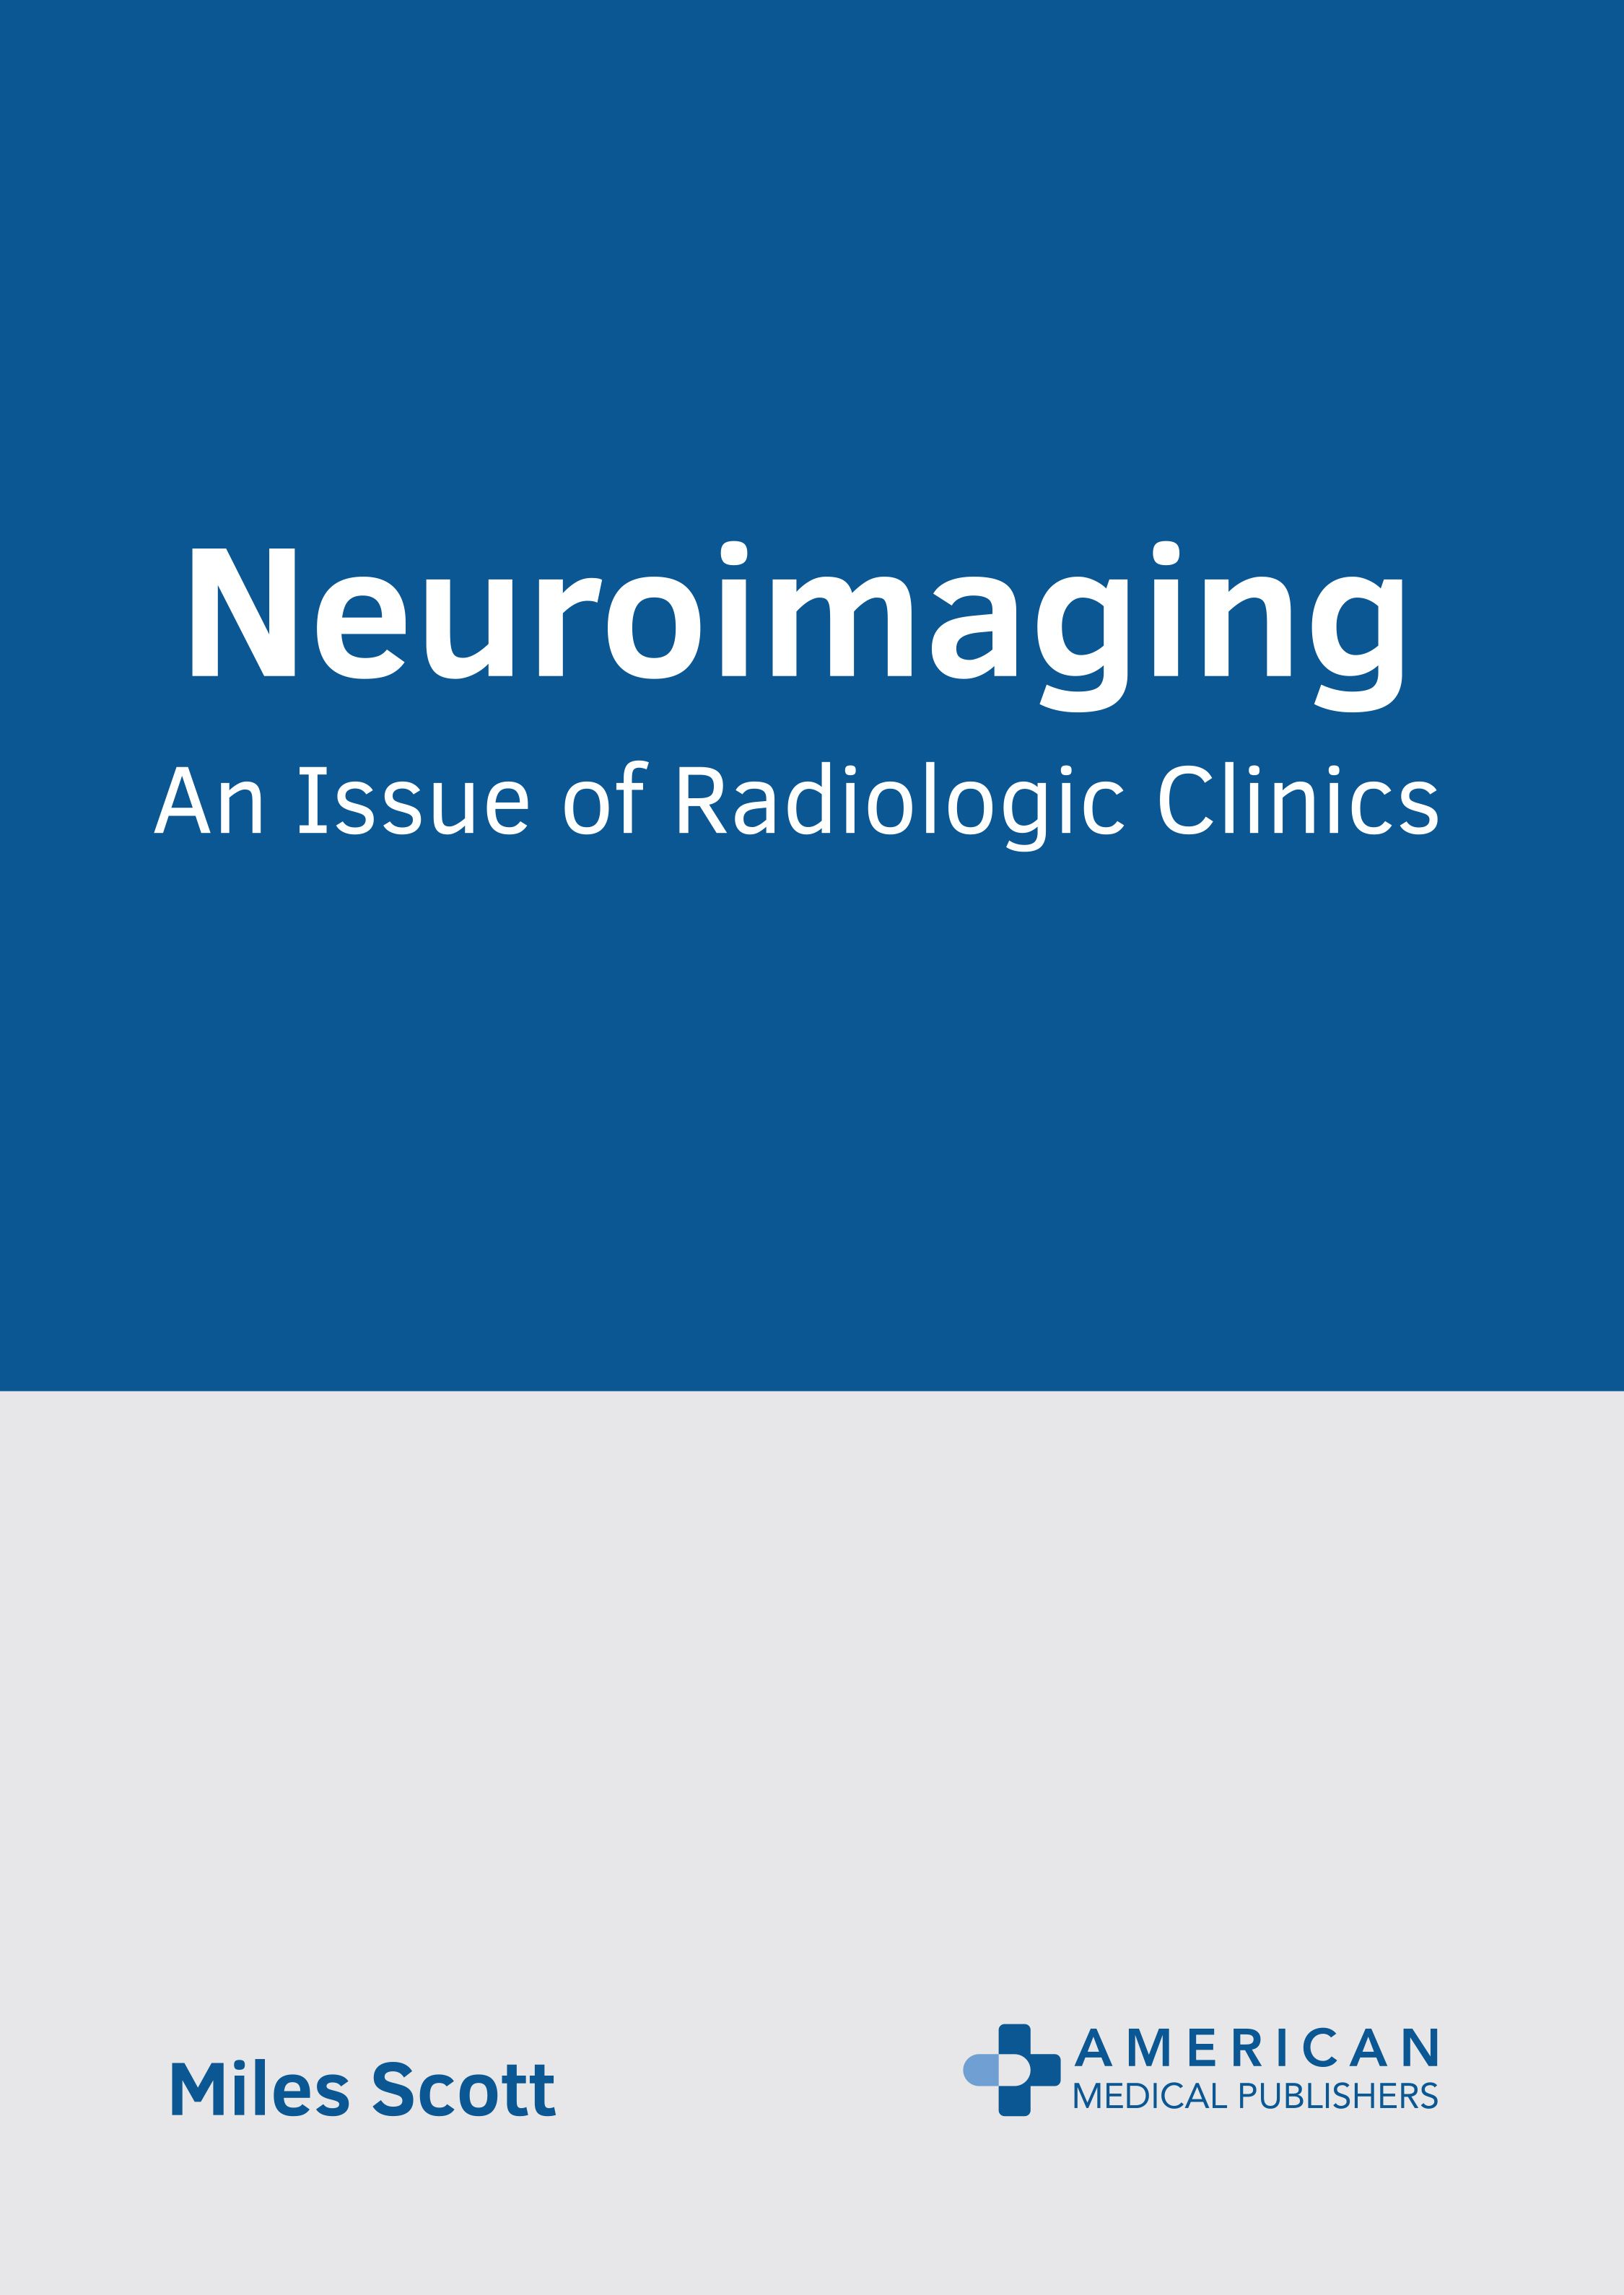 

exclusive-publishers/american-medical-publishers/neuroimaging-an-issue-of-radiologic-clinics-9798887403090